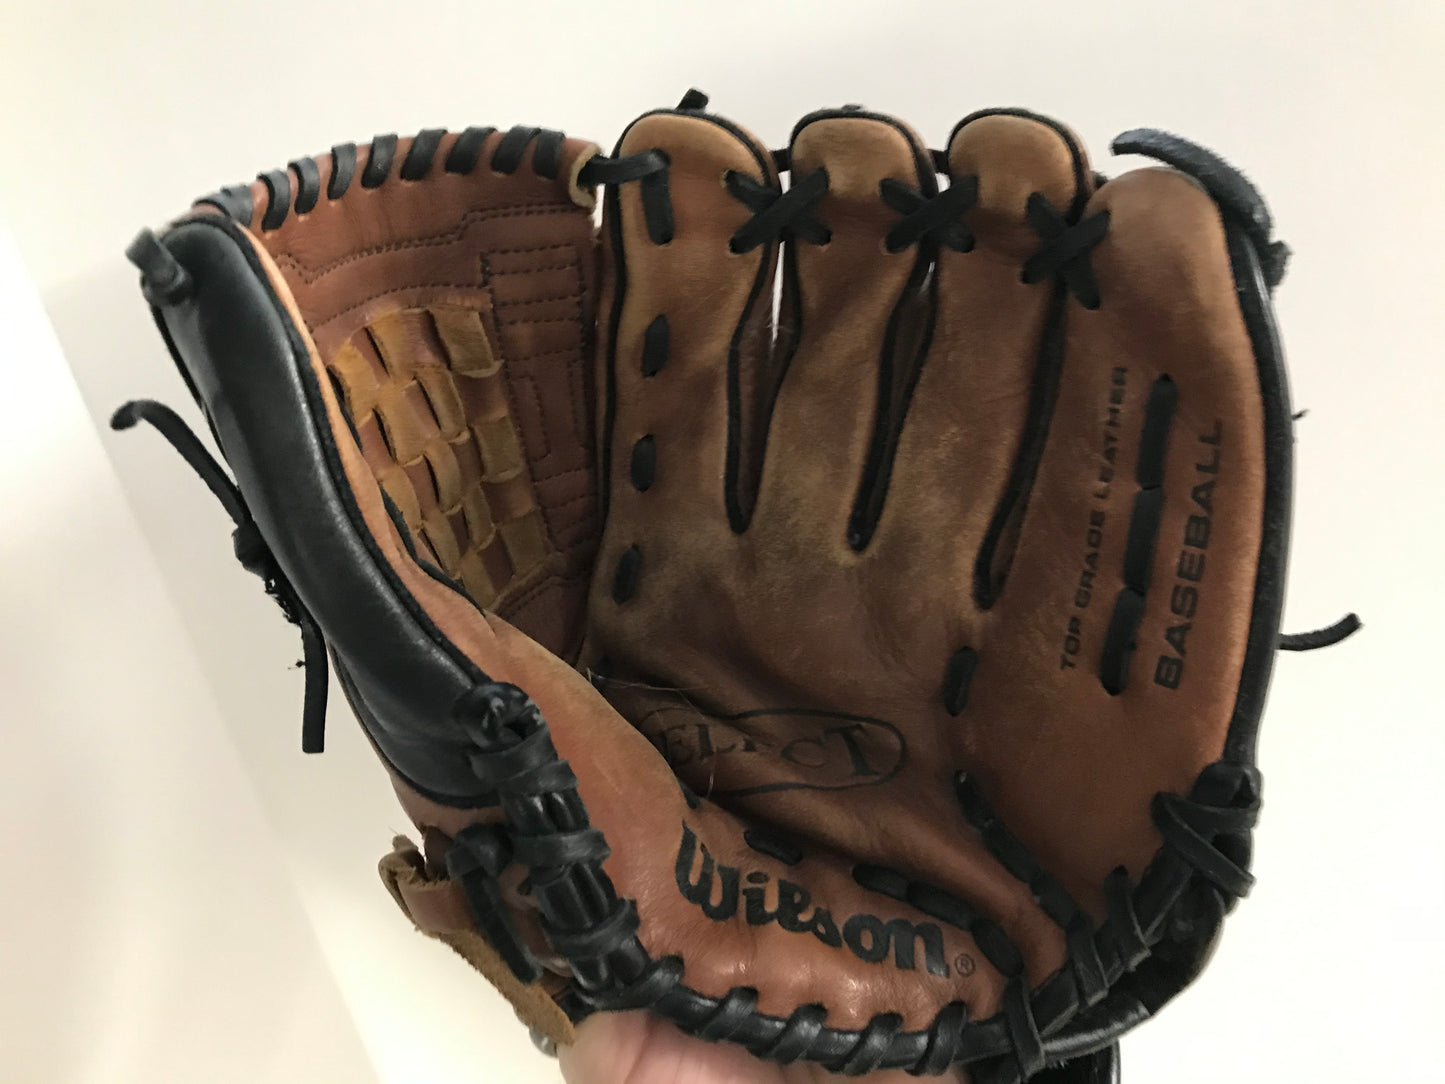 Baseball Glove Adult Size 11 inch  Wilson Black Brown  Leather Fits on Left Hand